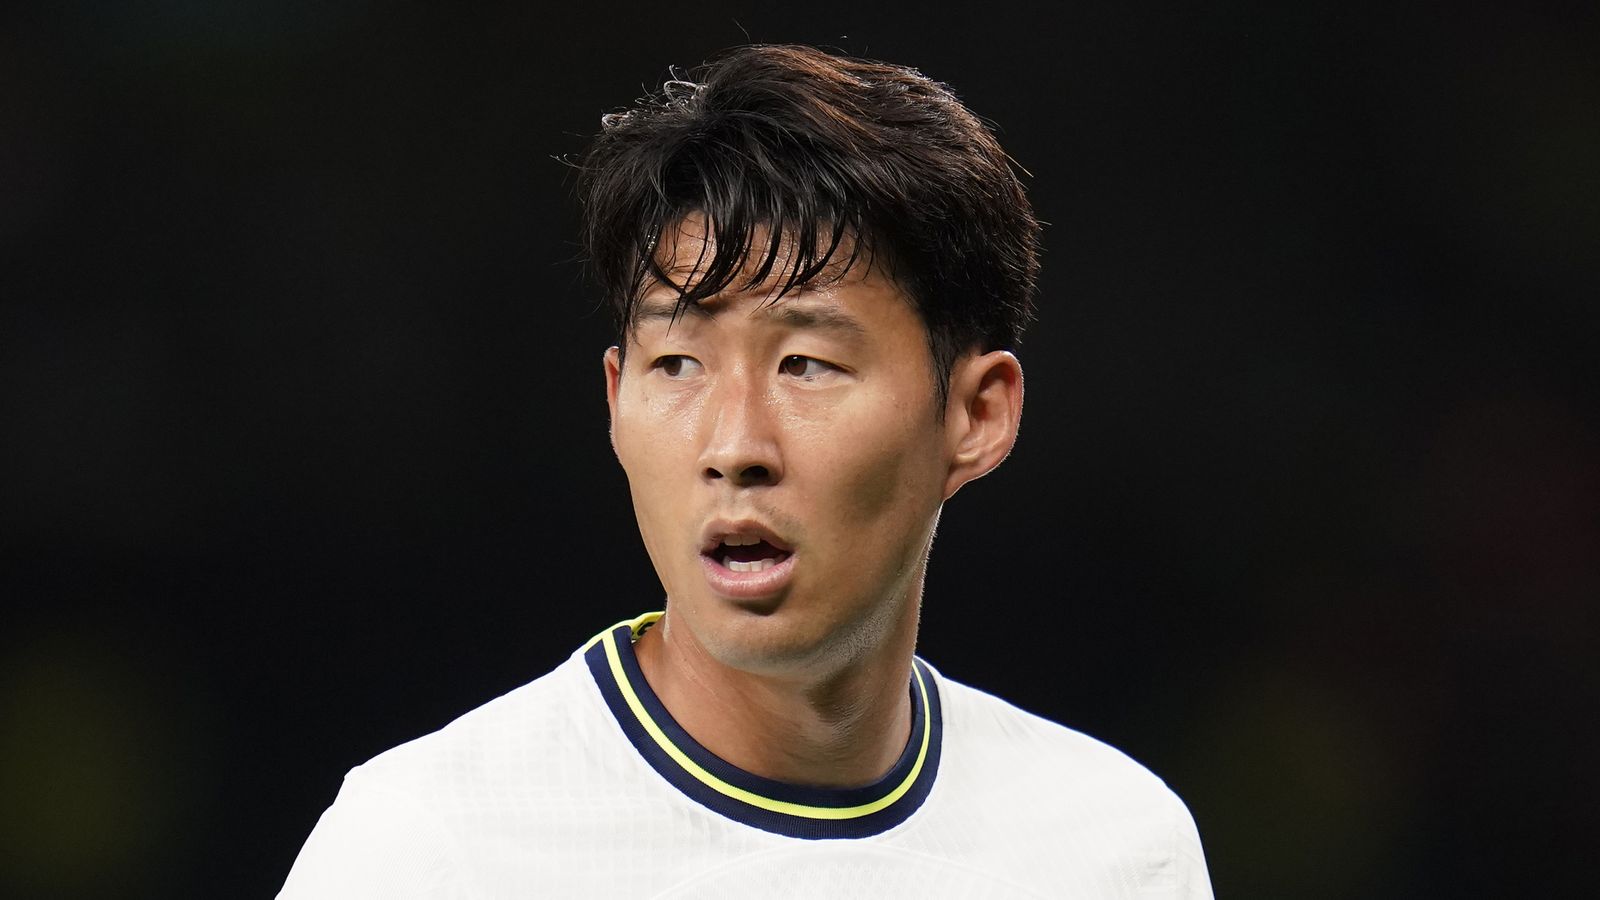 Heung-Min Son’s form: What’s going wrong for the Tottenham forward this season as he struggles for goals?